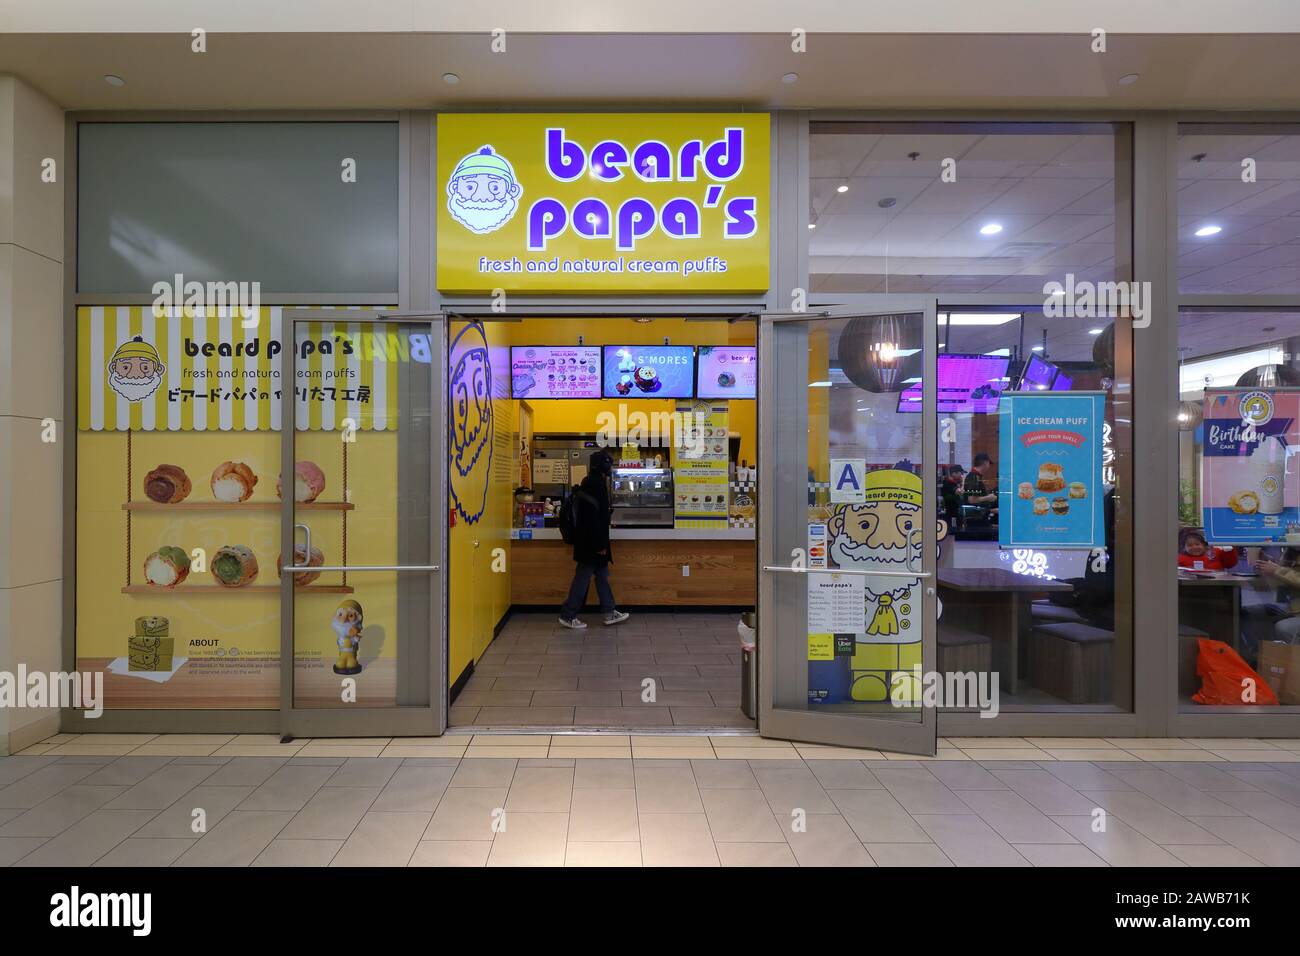 A Beard Papa's creme puff shop in the Skyview Center in Flushing, NY. Stock Photo